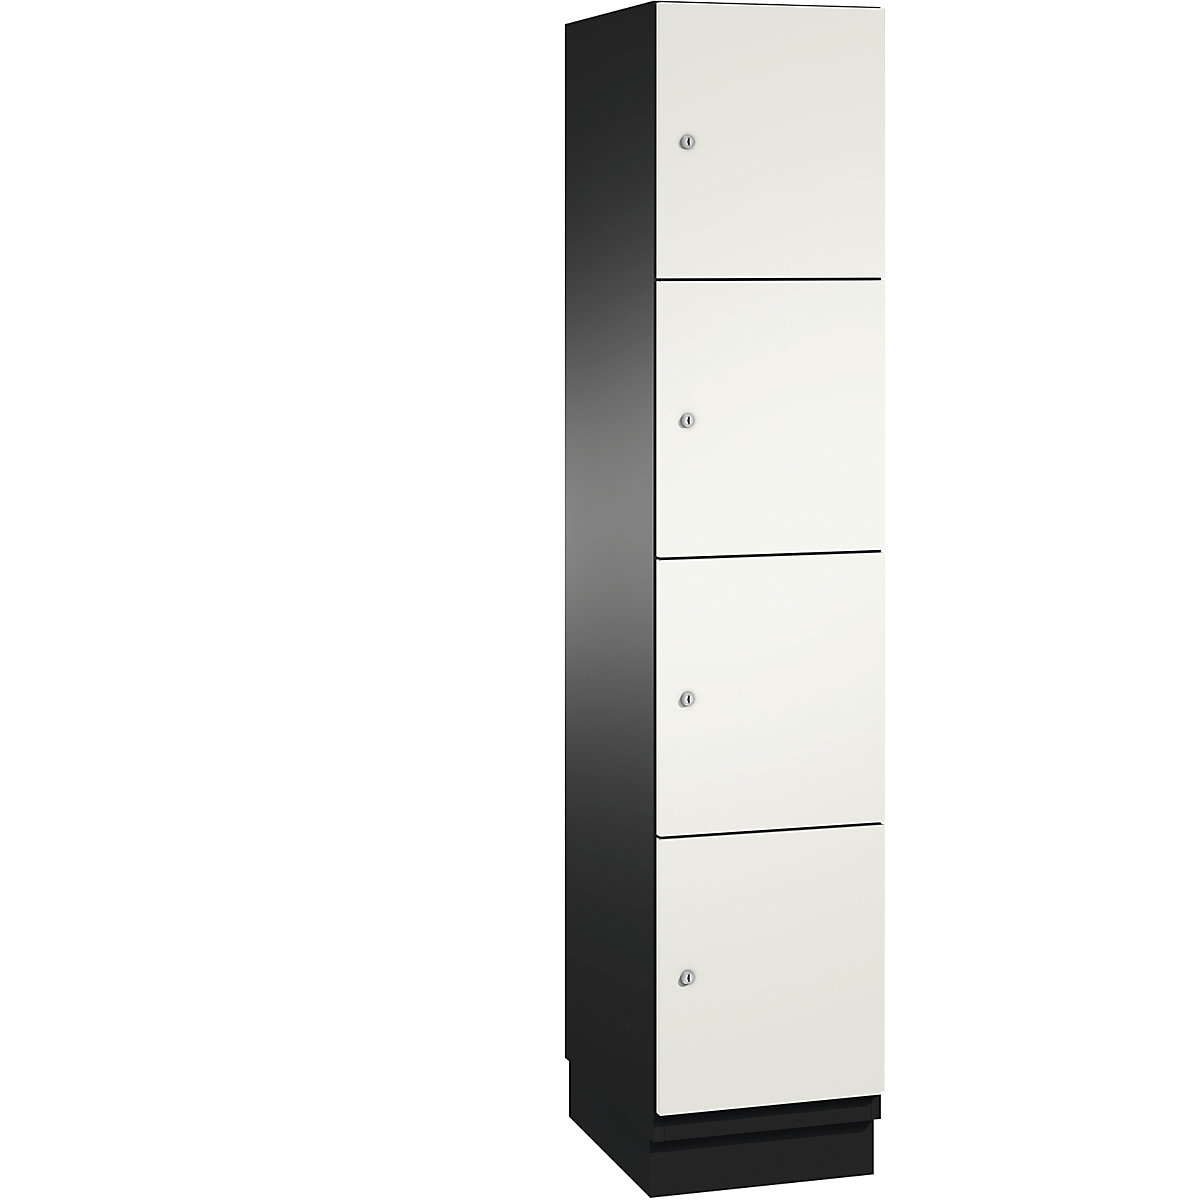 CAMBIO compartment locker with sheet steel doors – C+P, 4 compartments, width 400 mm, body black grey / door pure white-4